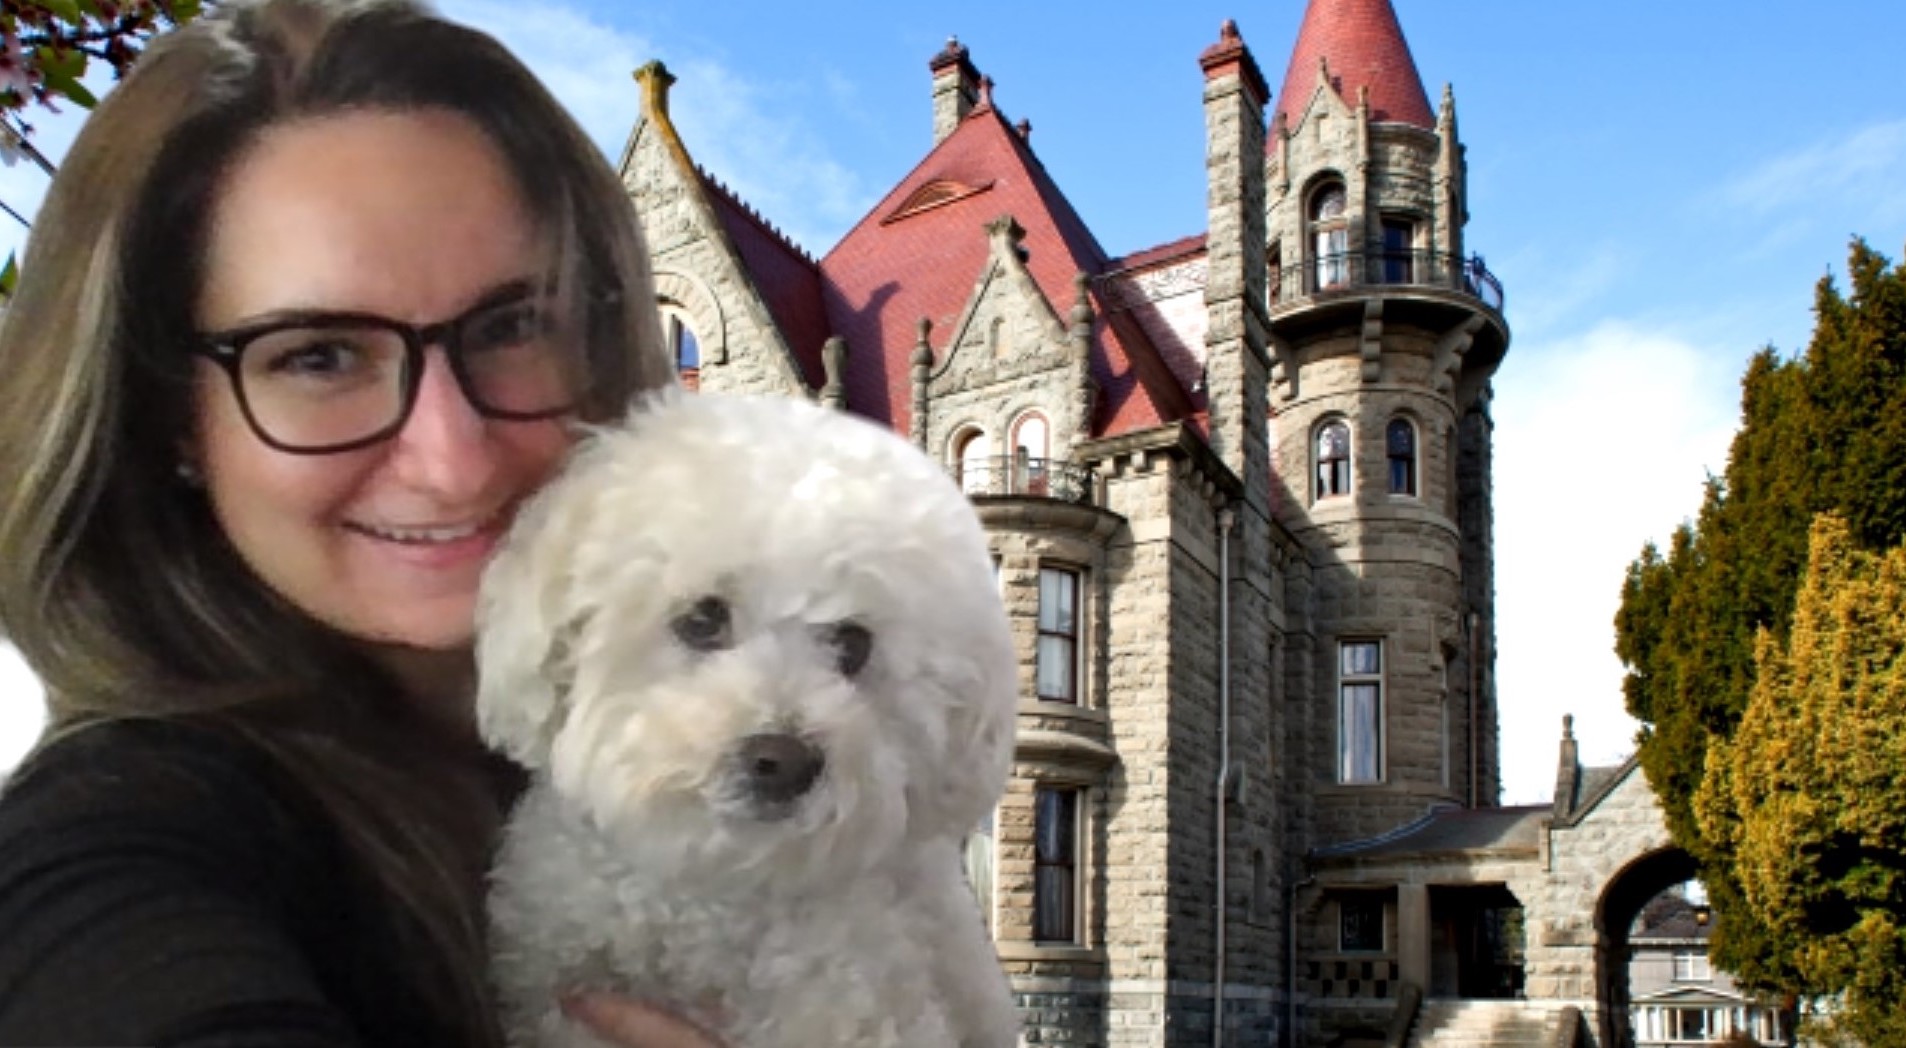 A woman poses with her dog in front of a castle.